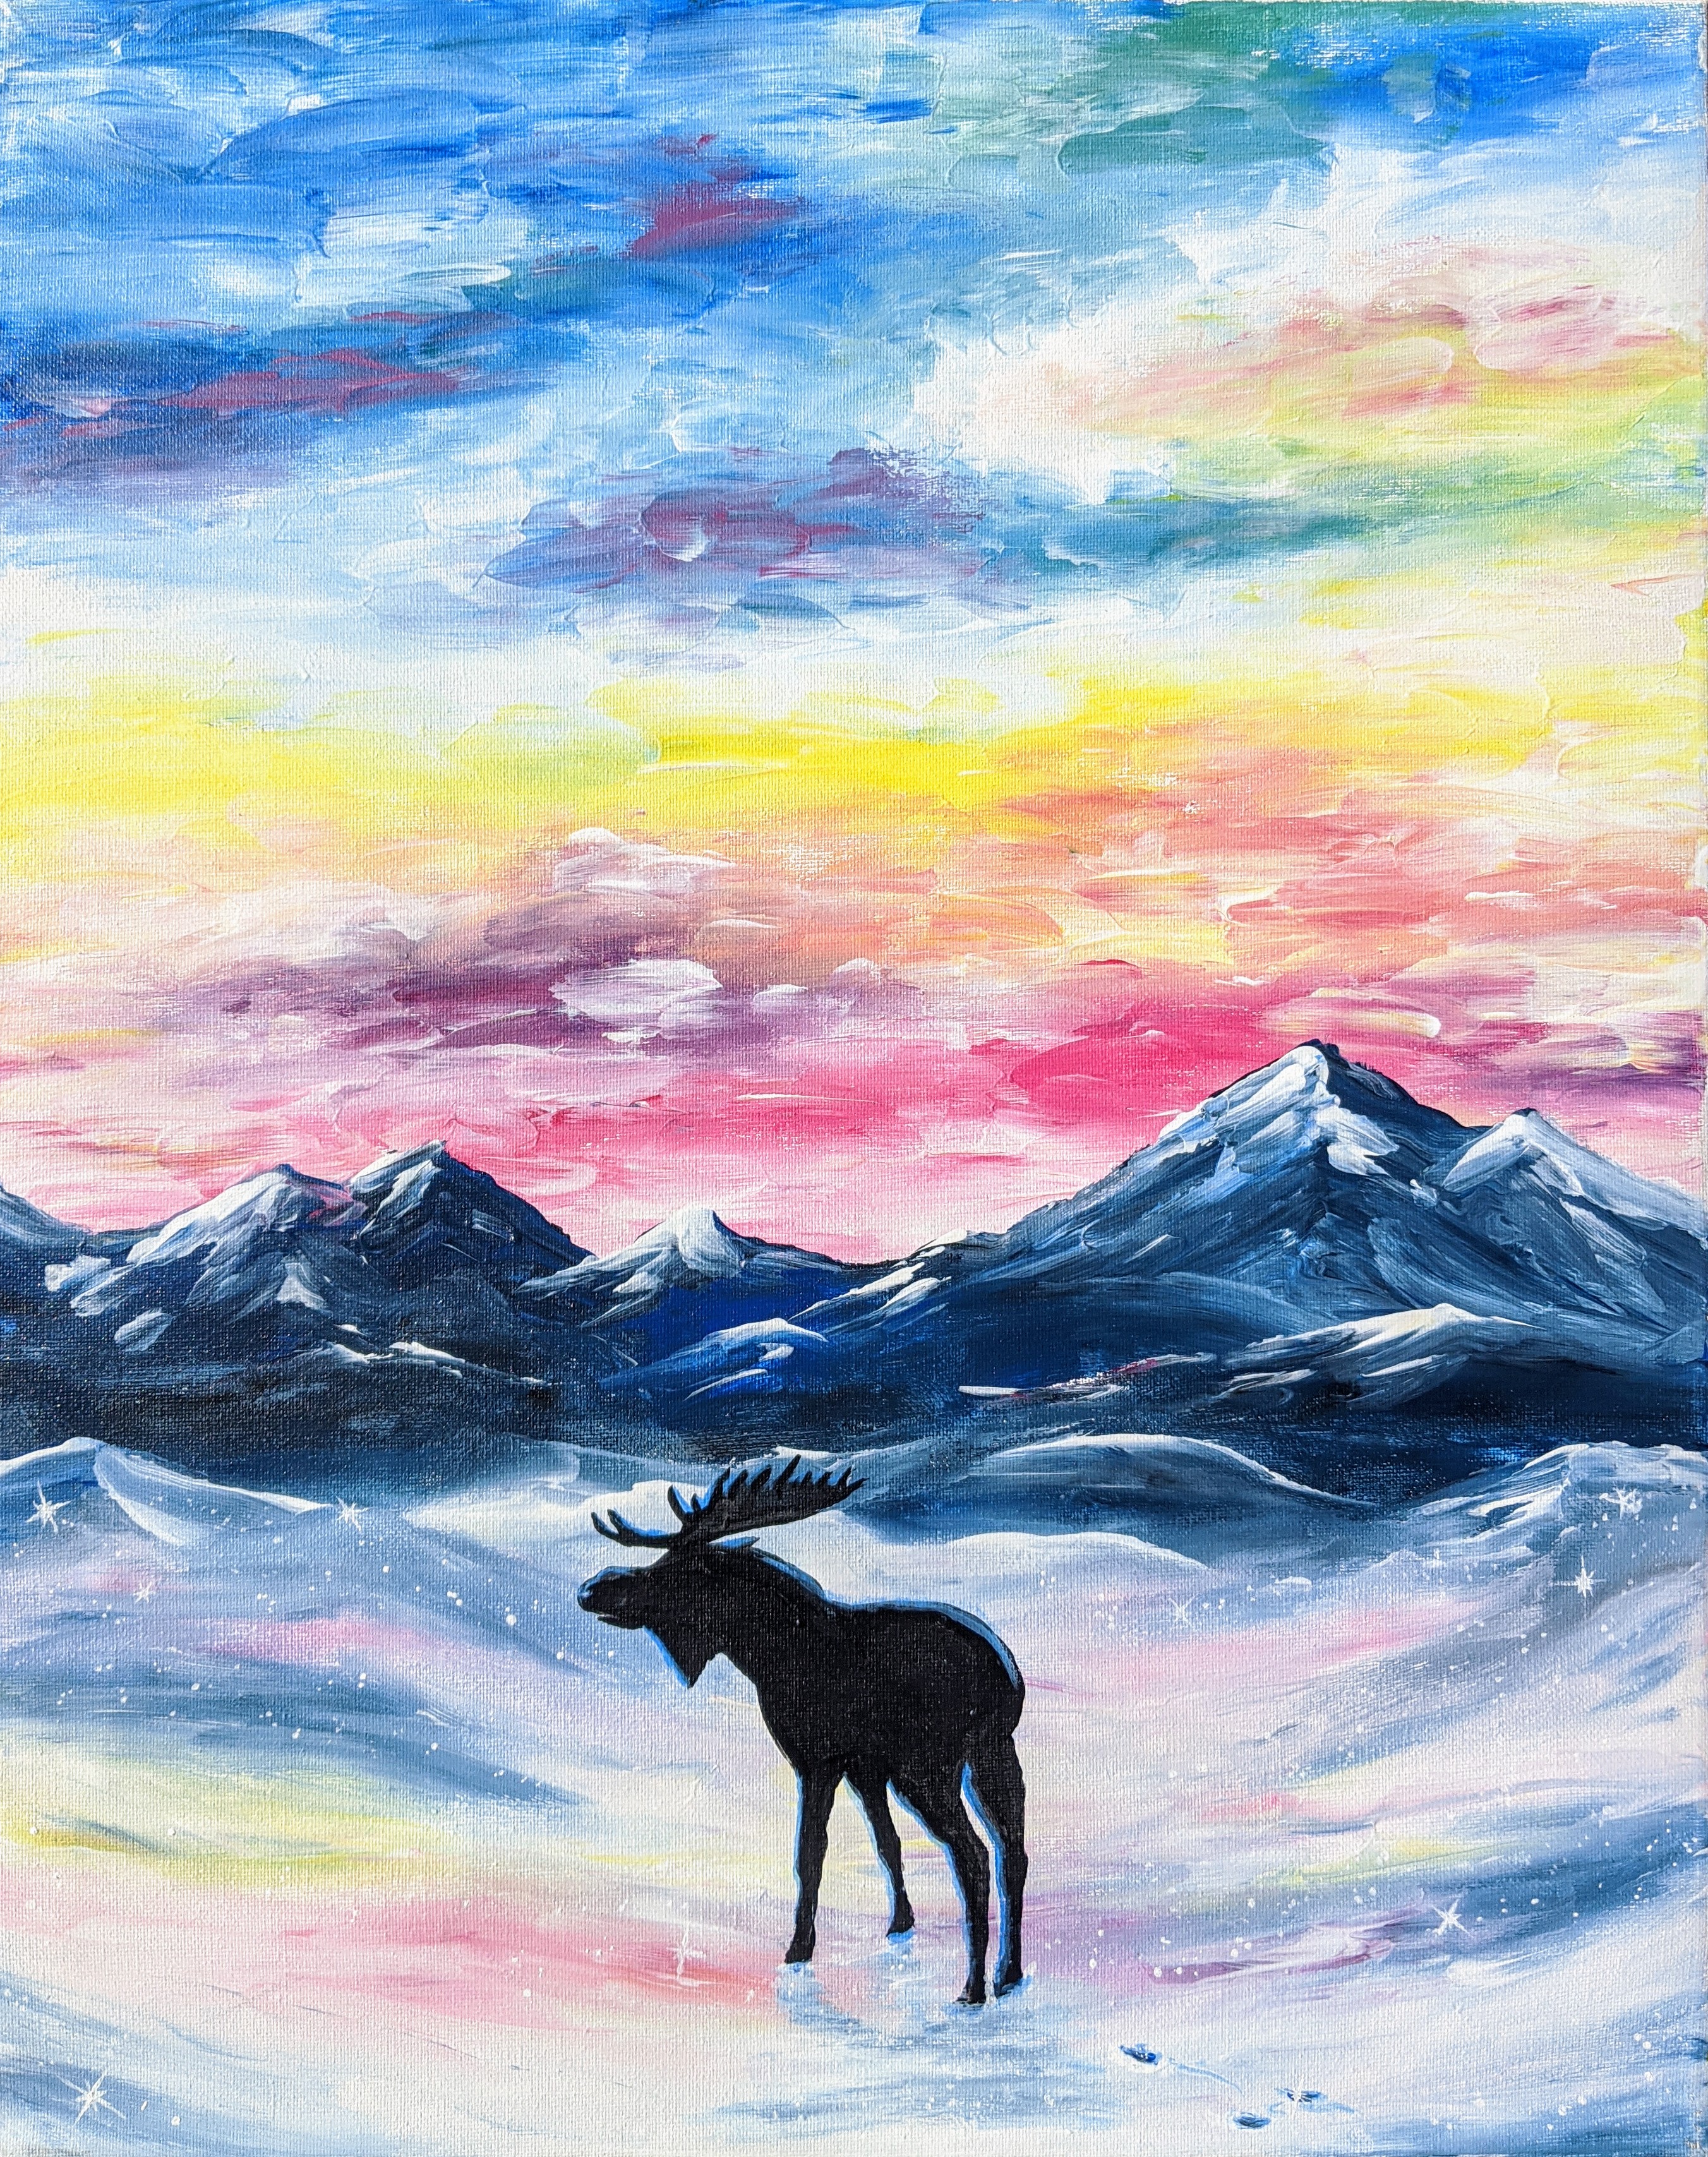 A Magical Moose experience project by Yaymaker